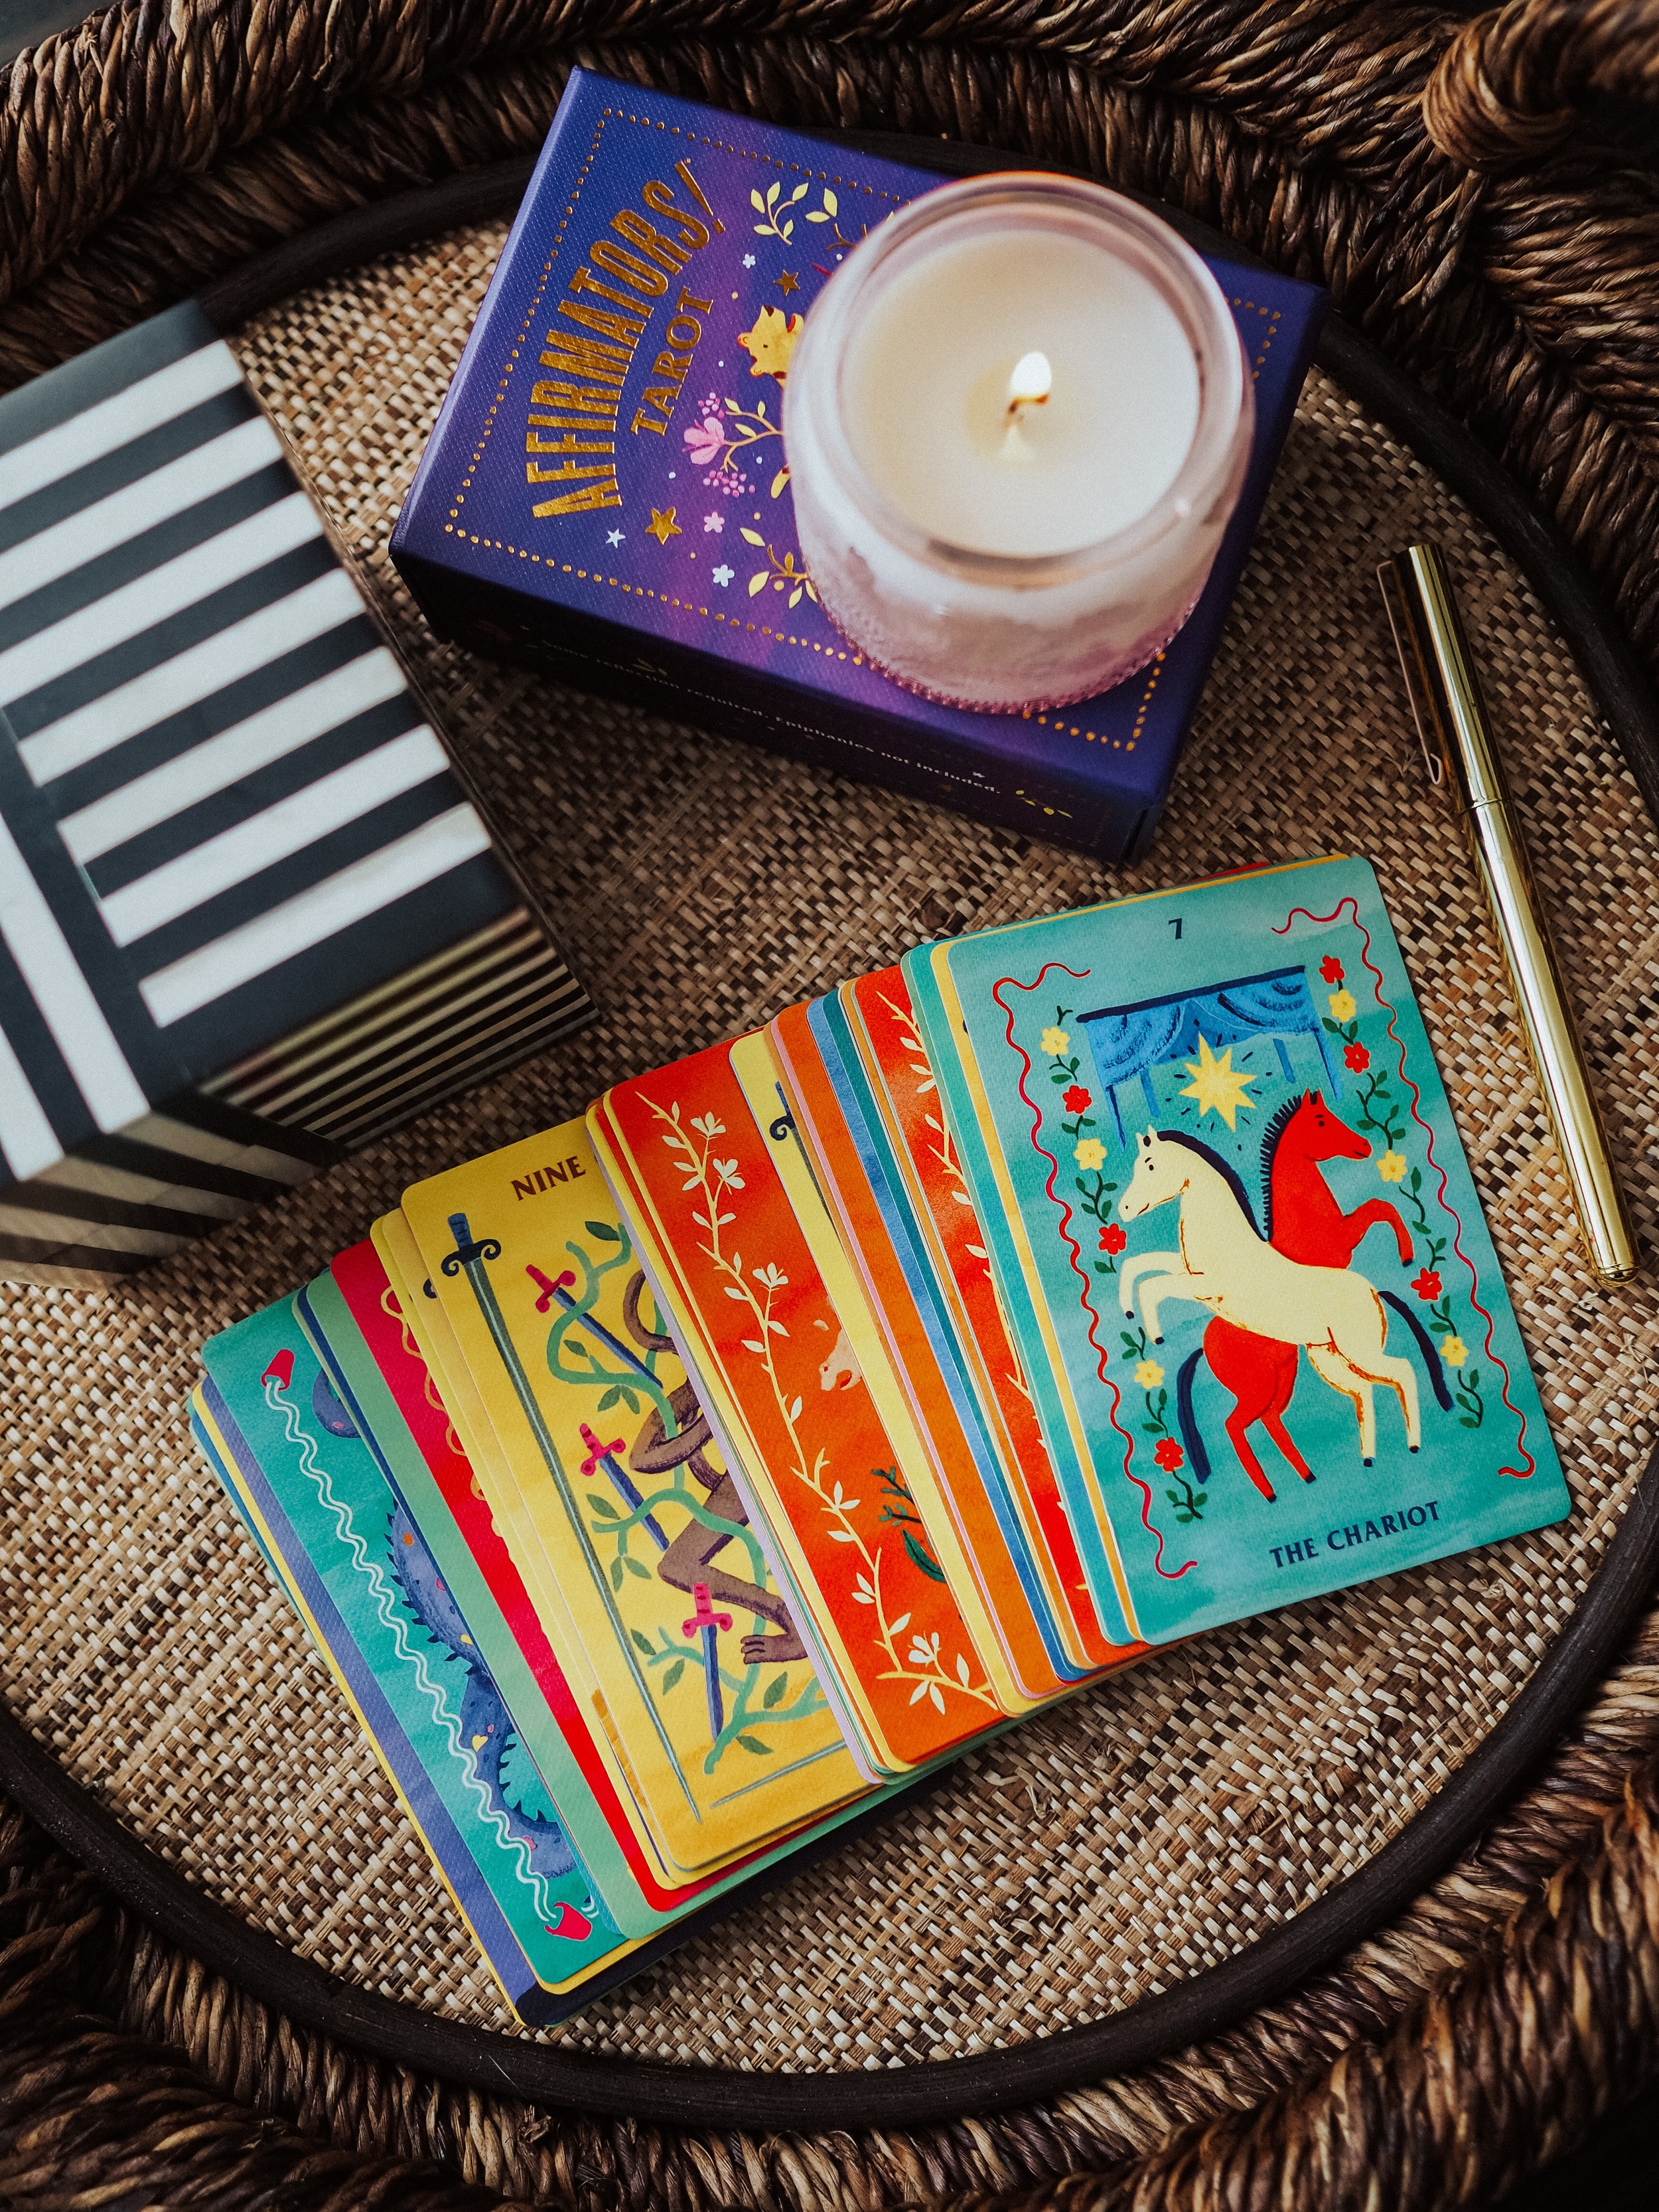 Kelsey from Blondes and Bagels shares her favorite easy, simple, one card tarot spreads for beginners In this blog post. Learn tarot here!